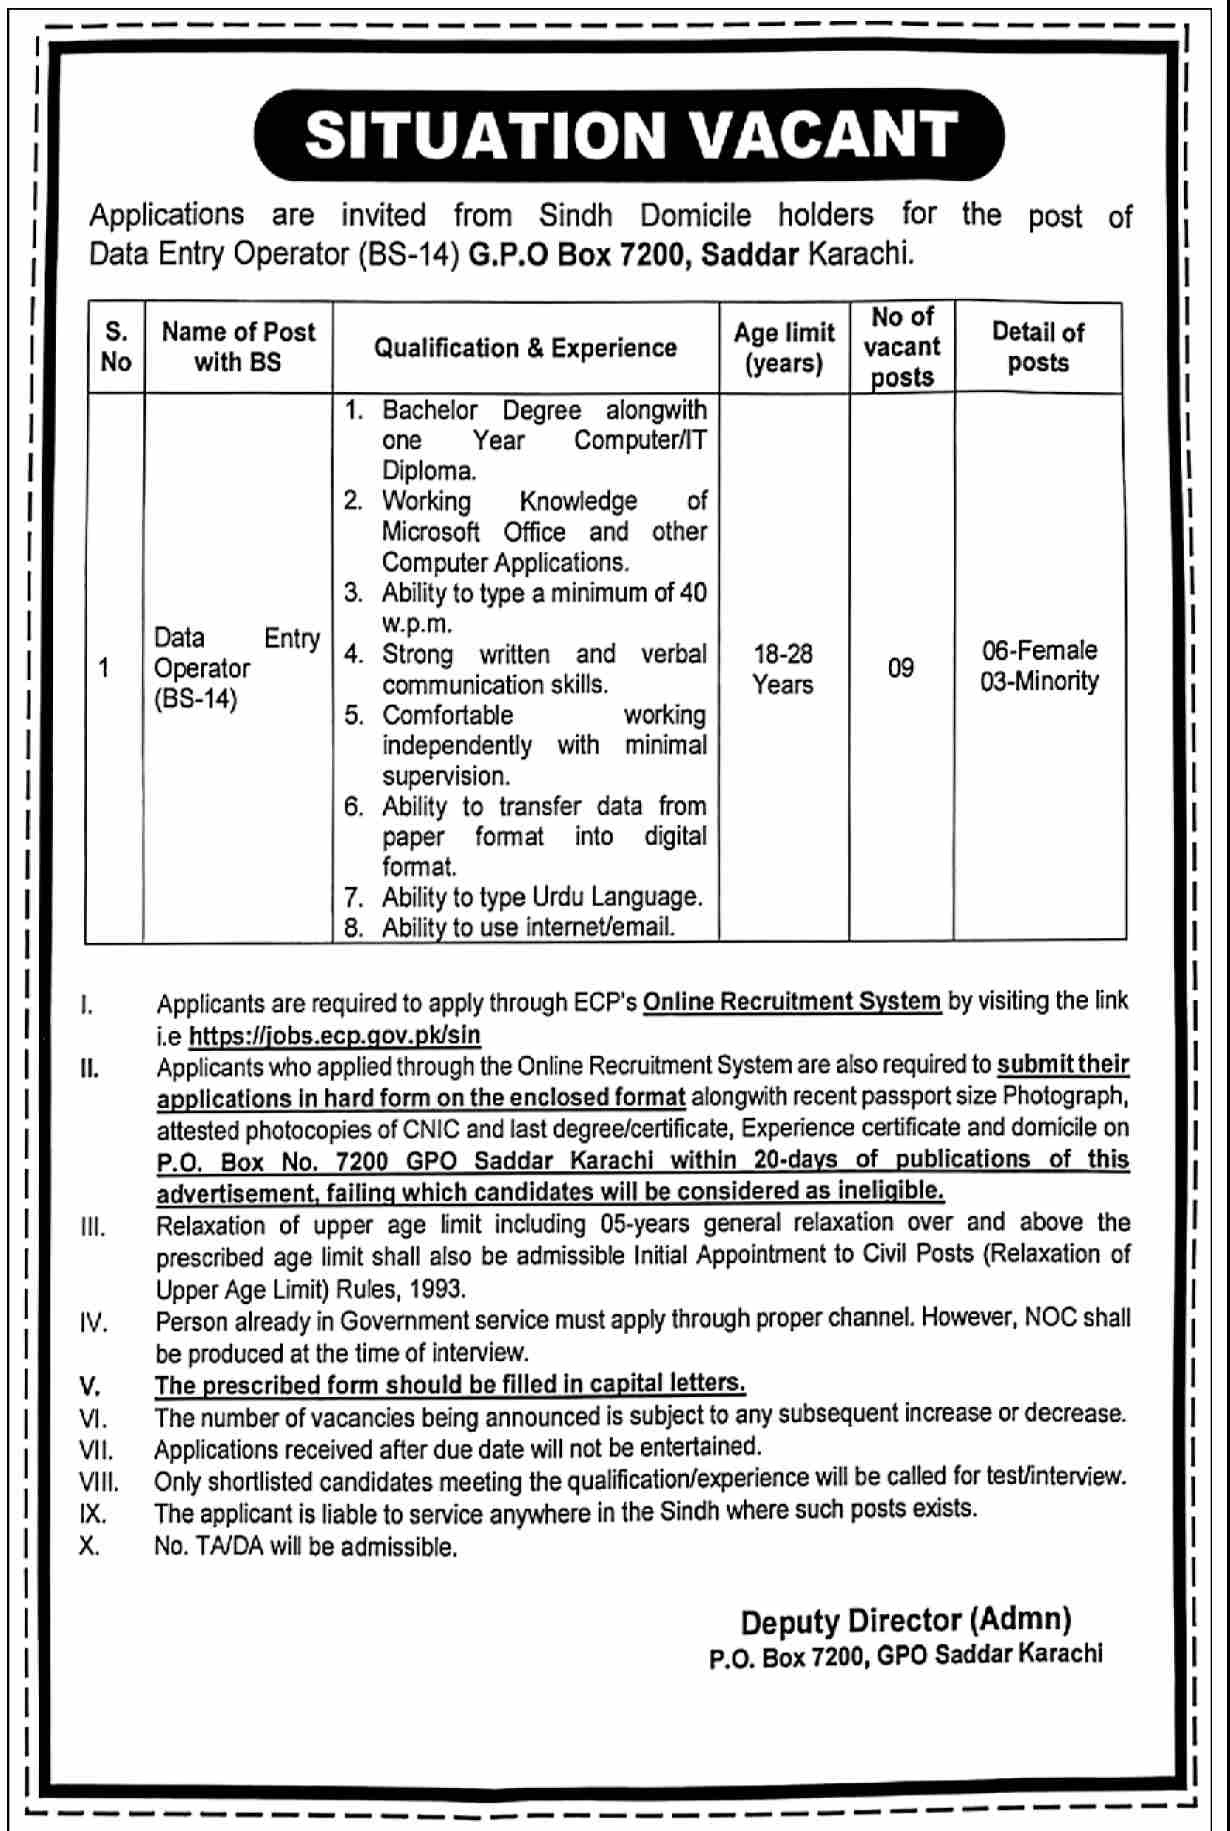 Data Entry Operator BS-14 ECP Government Jobs For Sindh Domicile Holders